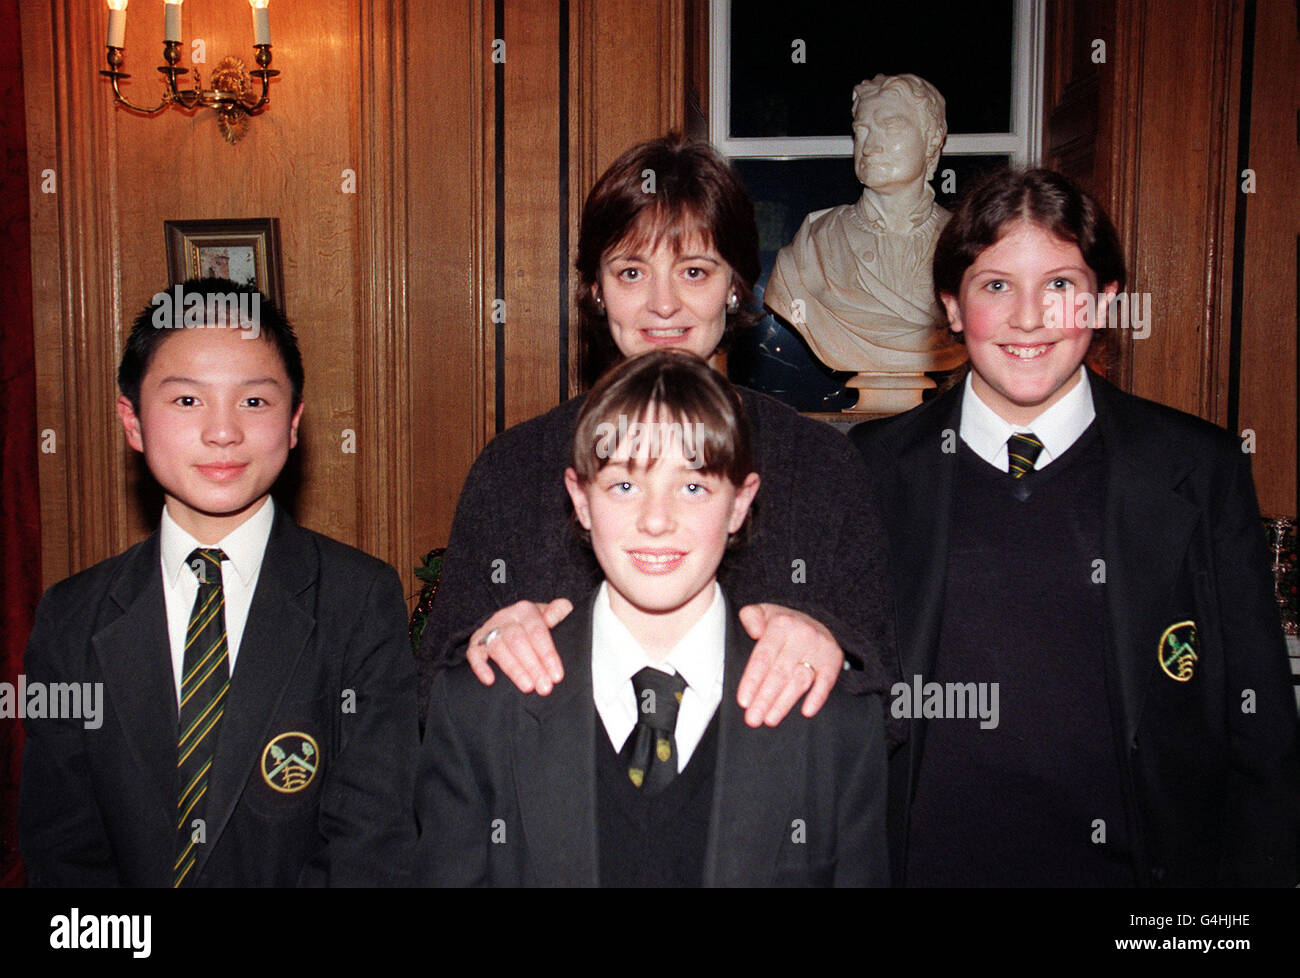 Prime Minister's wife Cherie Blair and local children from Epping Forest (l/r front) Eric Tang, Gemma Hack and Claire Saggers, at 10 Downing Street today (Tuesday), where she held a tea reception. Photo by Sean Dempsey. Stock Photo